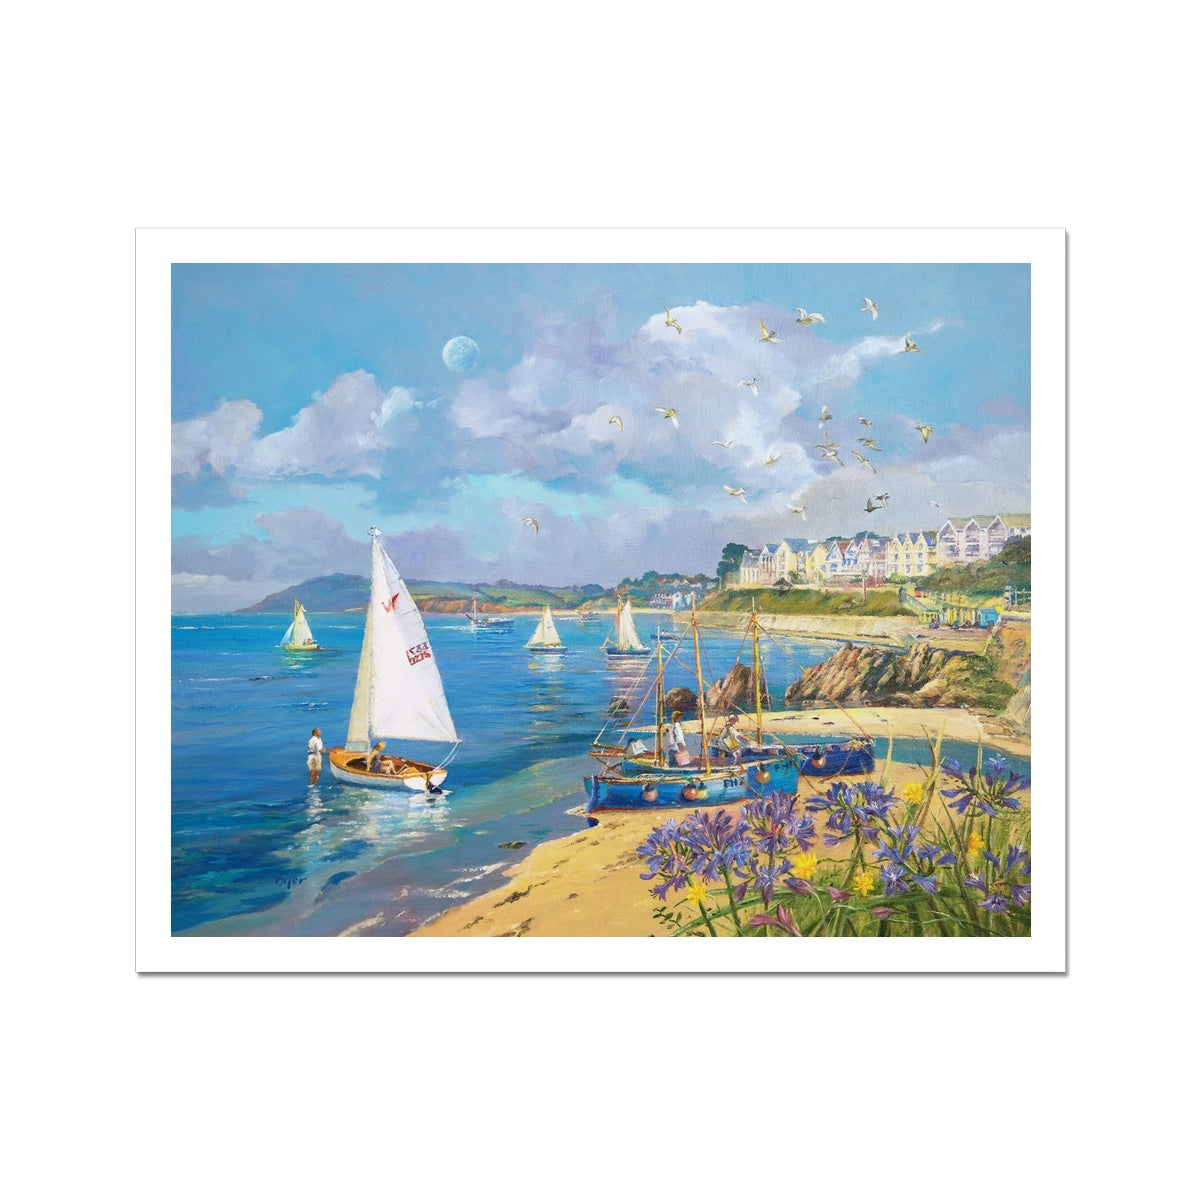 Ted Dyer Fine Art Print. Open Edition Cornish Art Print. 'White Sails and Agapanthus, Castle Beach, Falmouth'. Cornwall Art Gallery